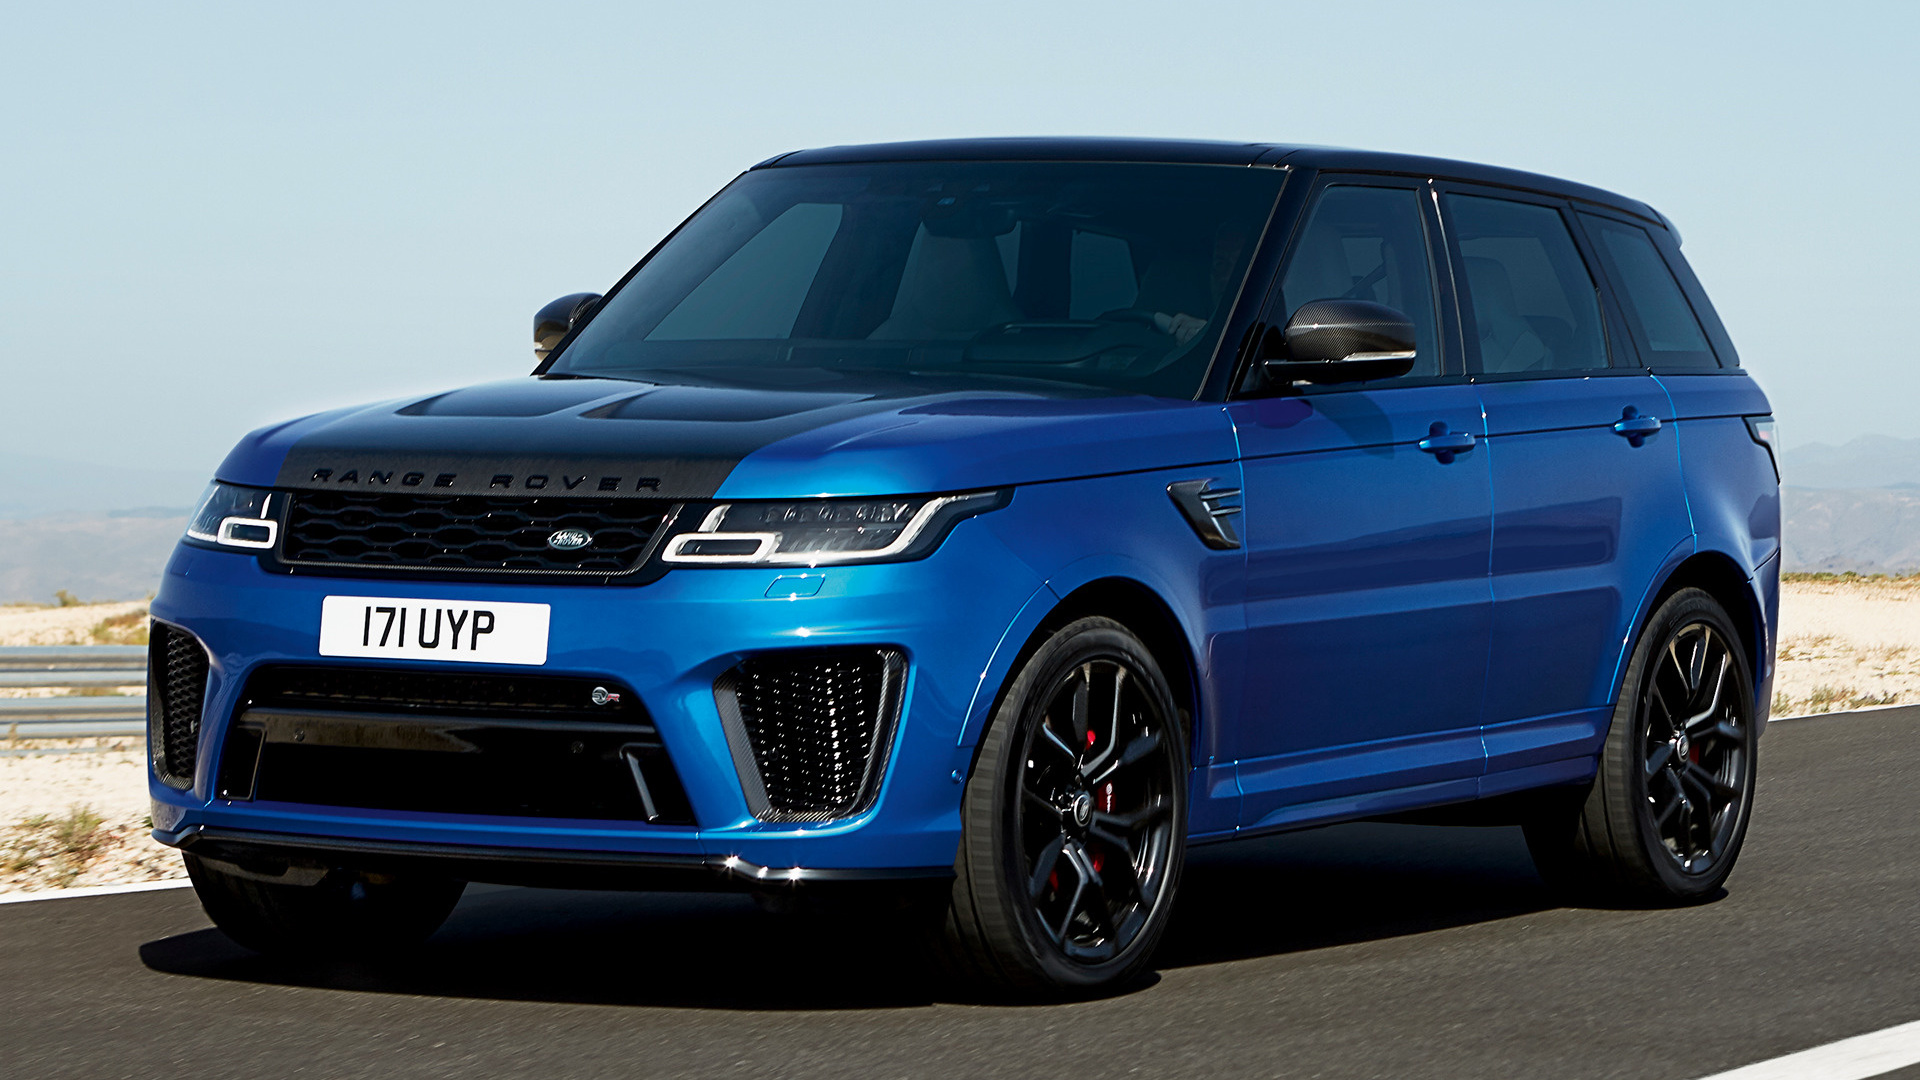 2017 Range Rover Sport SVR - Wallpapers and HD Images ...